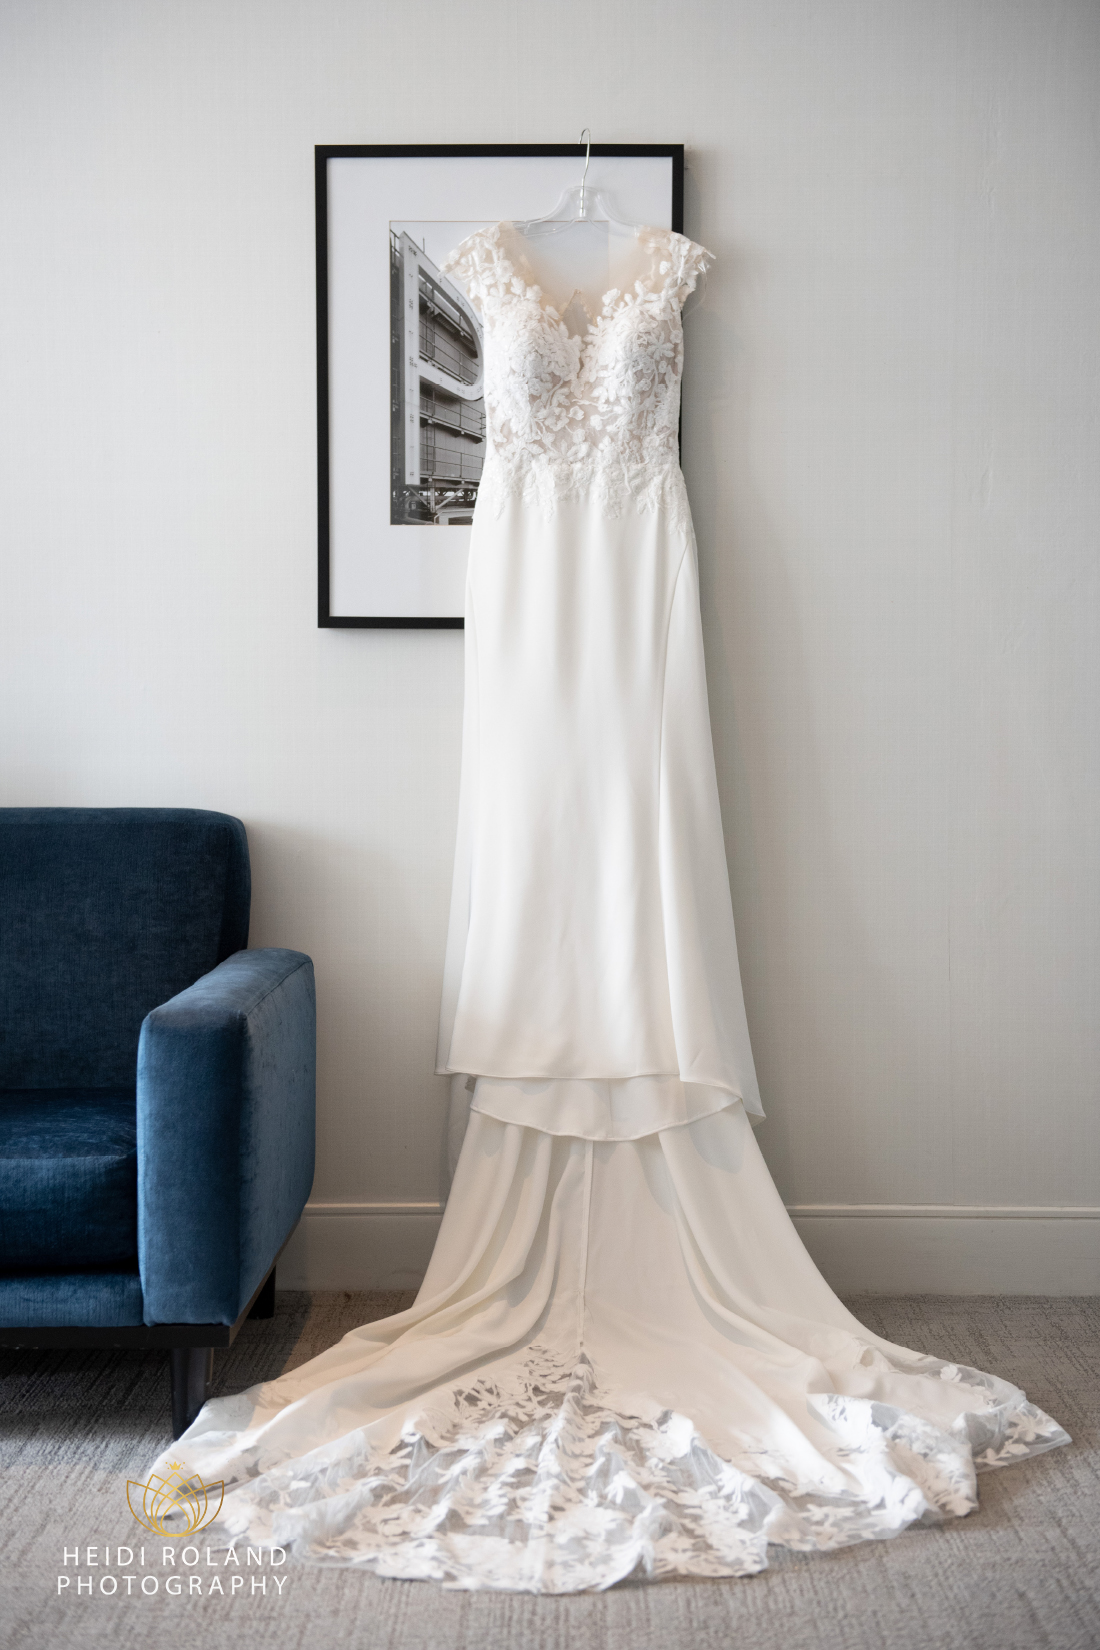 Lacy white wedding dress hanging from a picture frame at Philadelphia wedding